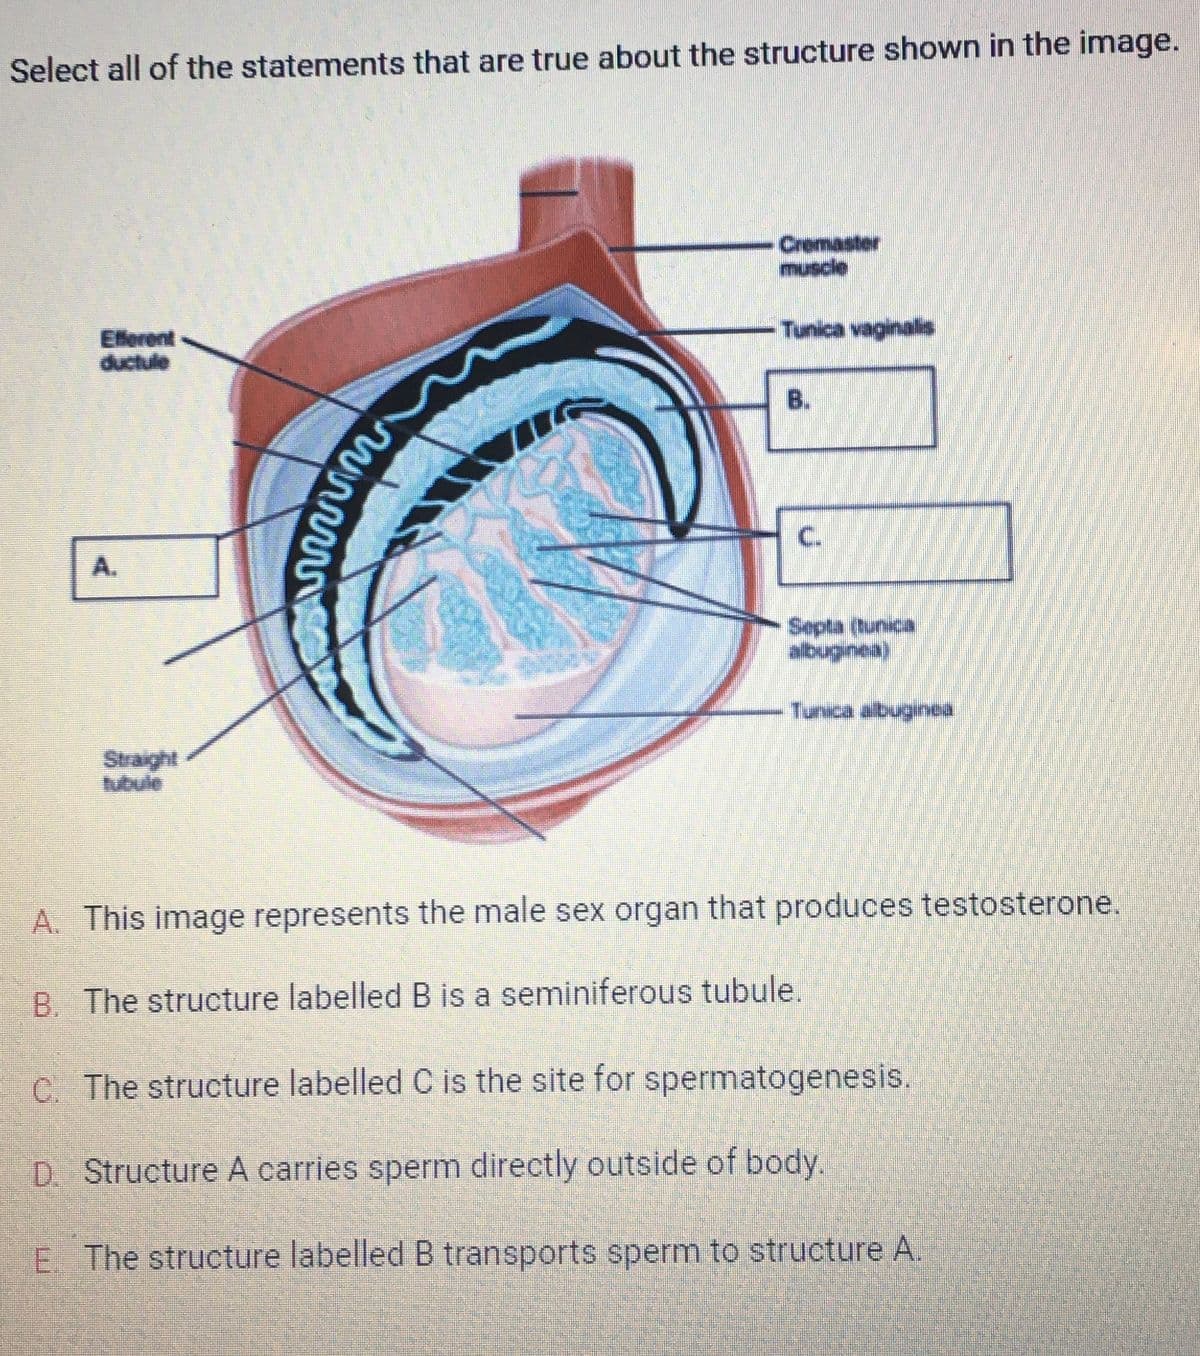 Select all of the statements that are true about the structure shown in the image.
Efferent
ductule
A.
Straight
tubule
wwwww
Cremaster
muscle
Tunica vaginalis
B.
C.
Septa (tunica
albuginea)
Tunica albuginea
A. This image represents the male sex organ that produces testosterone.
B. The structure labelled B is a seminiferous tubule.
C. The structure labelled C is the site for spermatogenesis.
D. Structure A carries sperm directly outside of body.
E. The structure labelled B transports sperm to structure A.